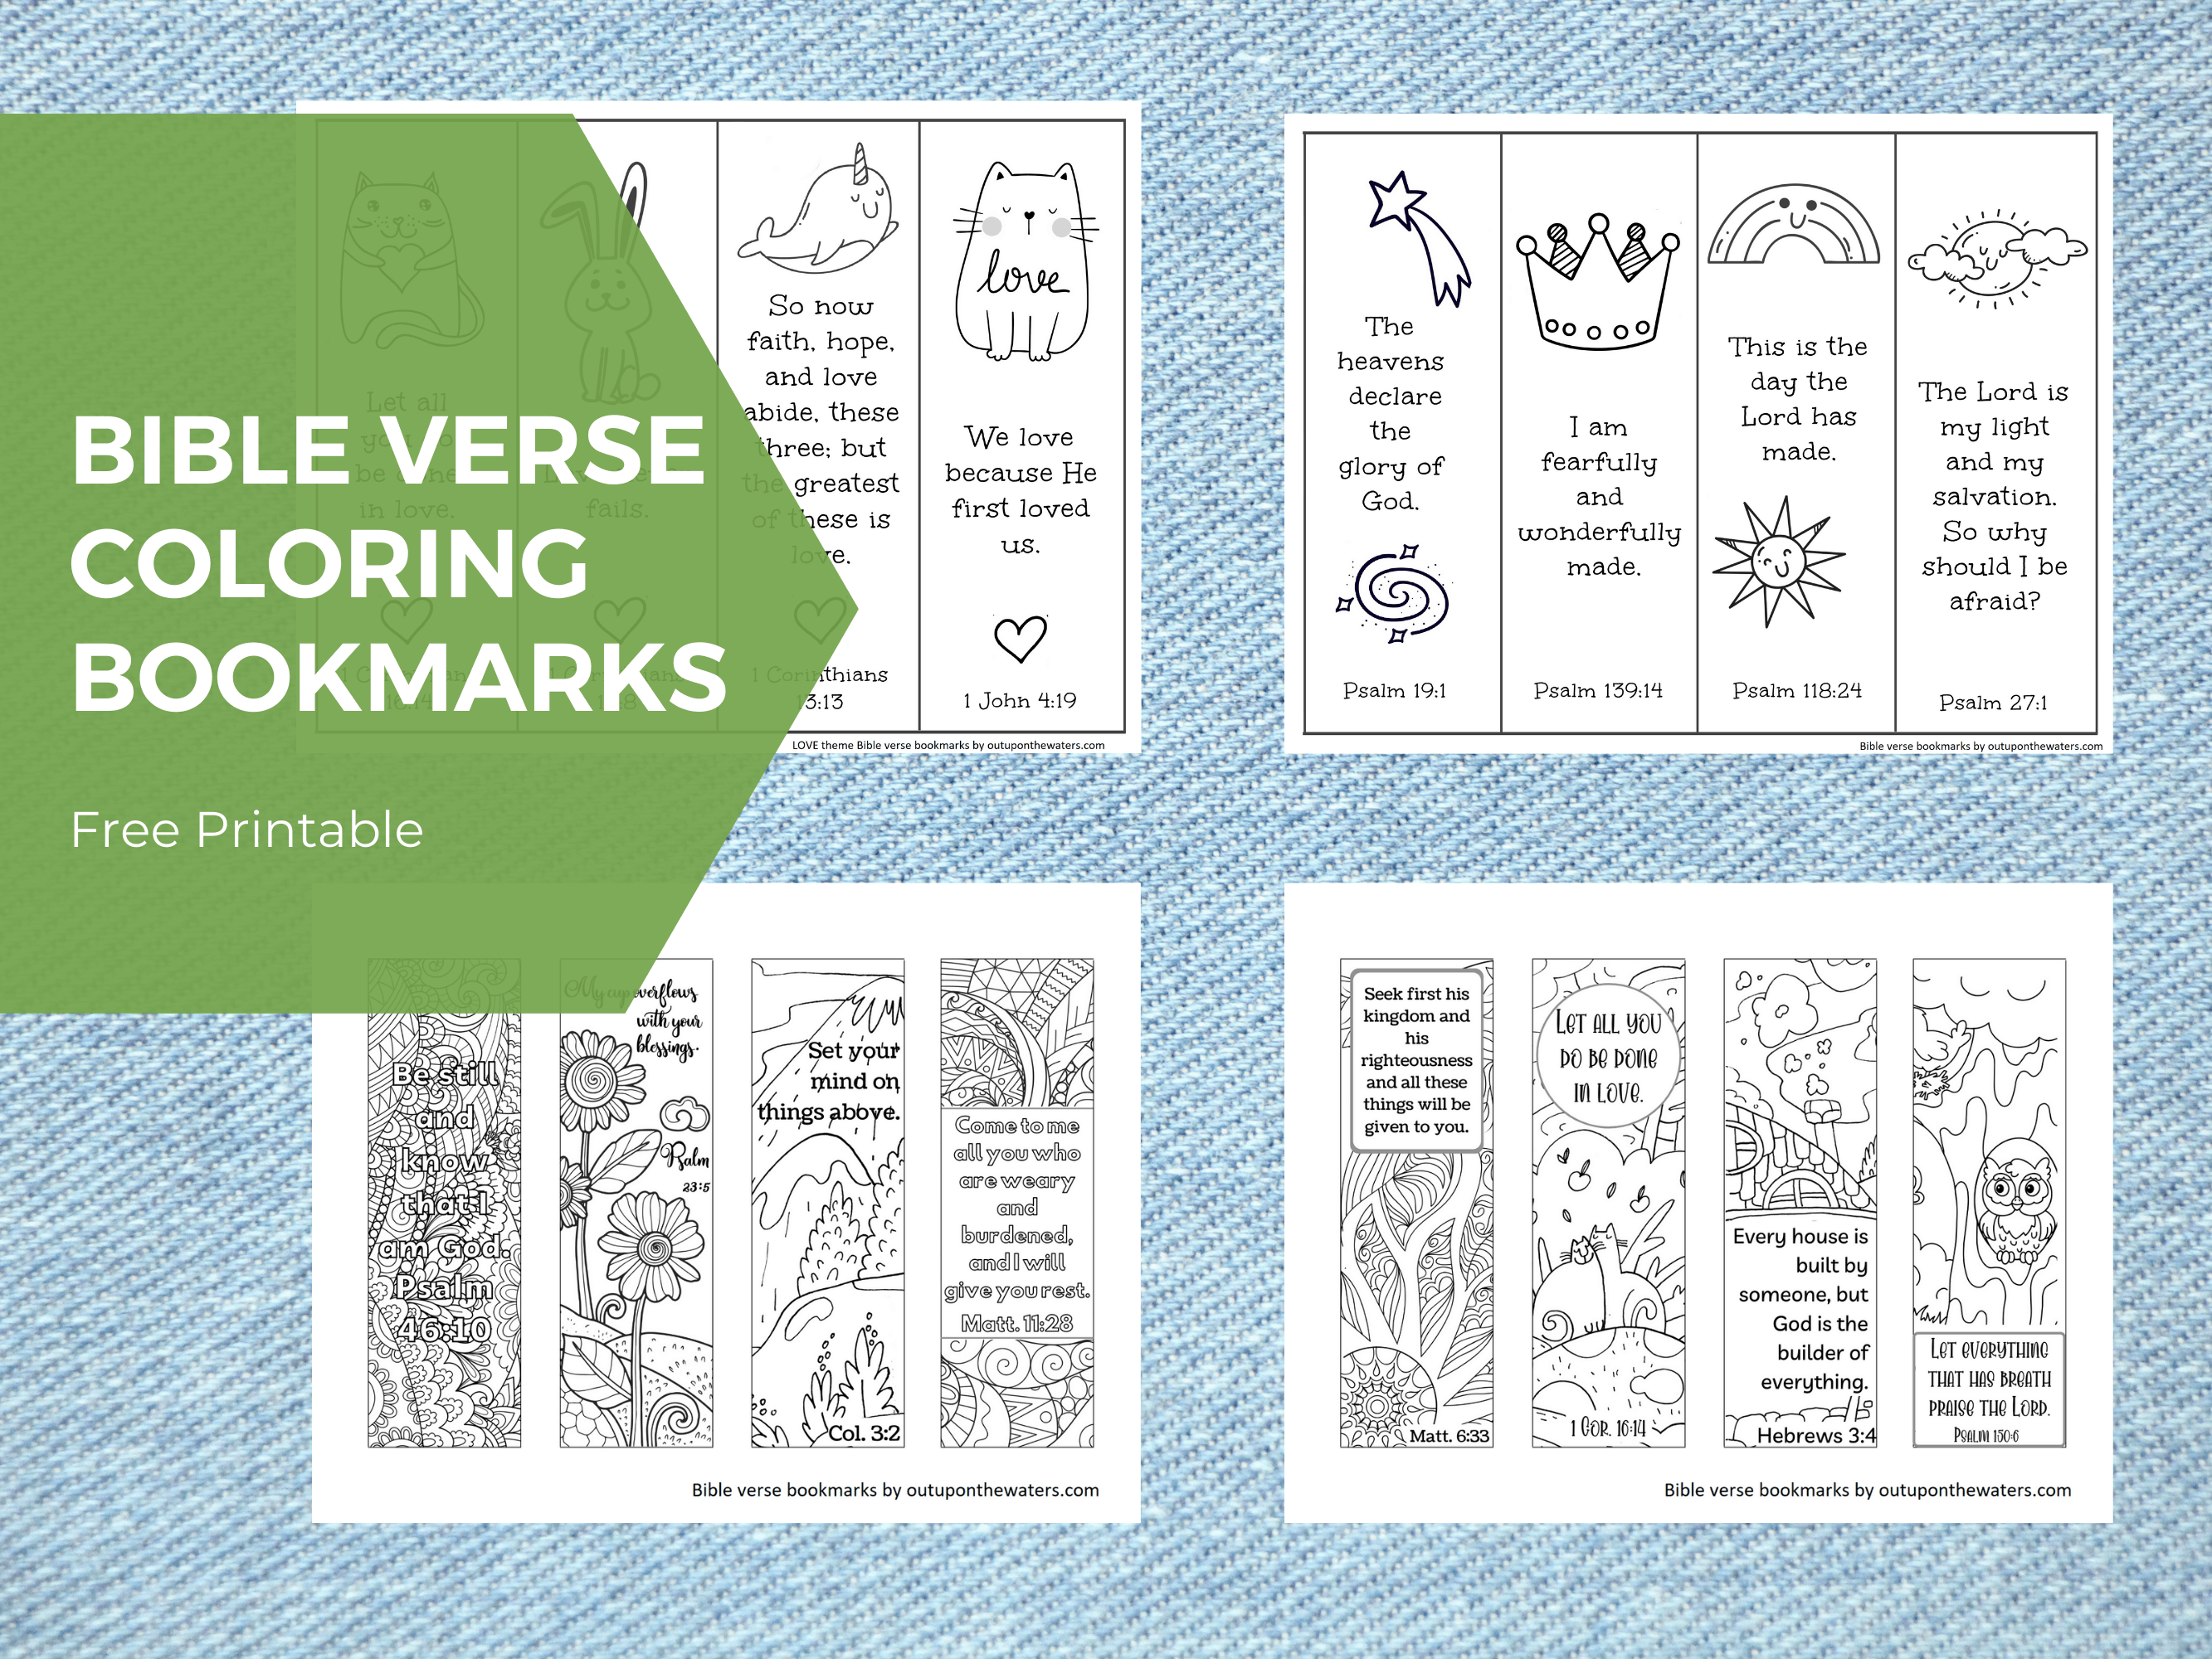 https://outuponthewaters.com/wp-content/uploads/2021/09/bible-verse-coloring-bookmarks-1.png